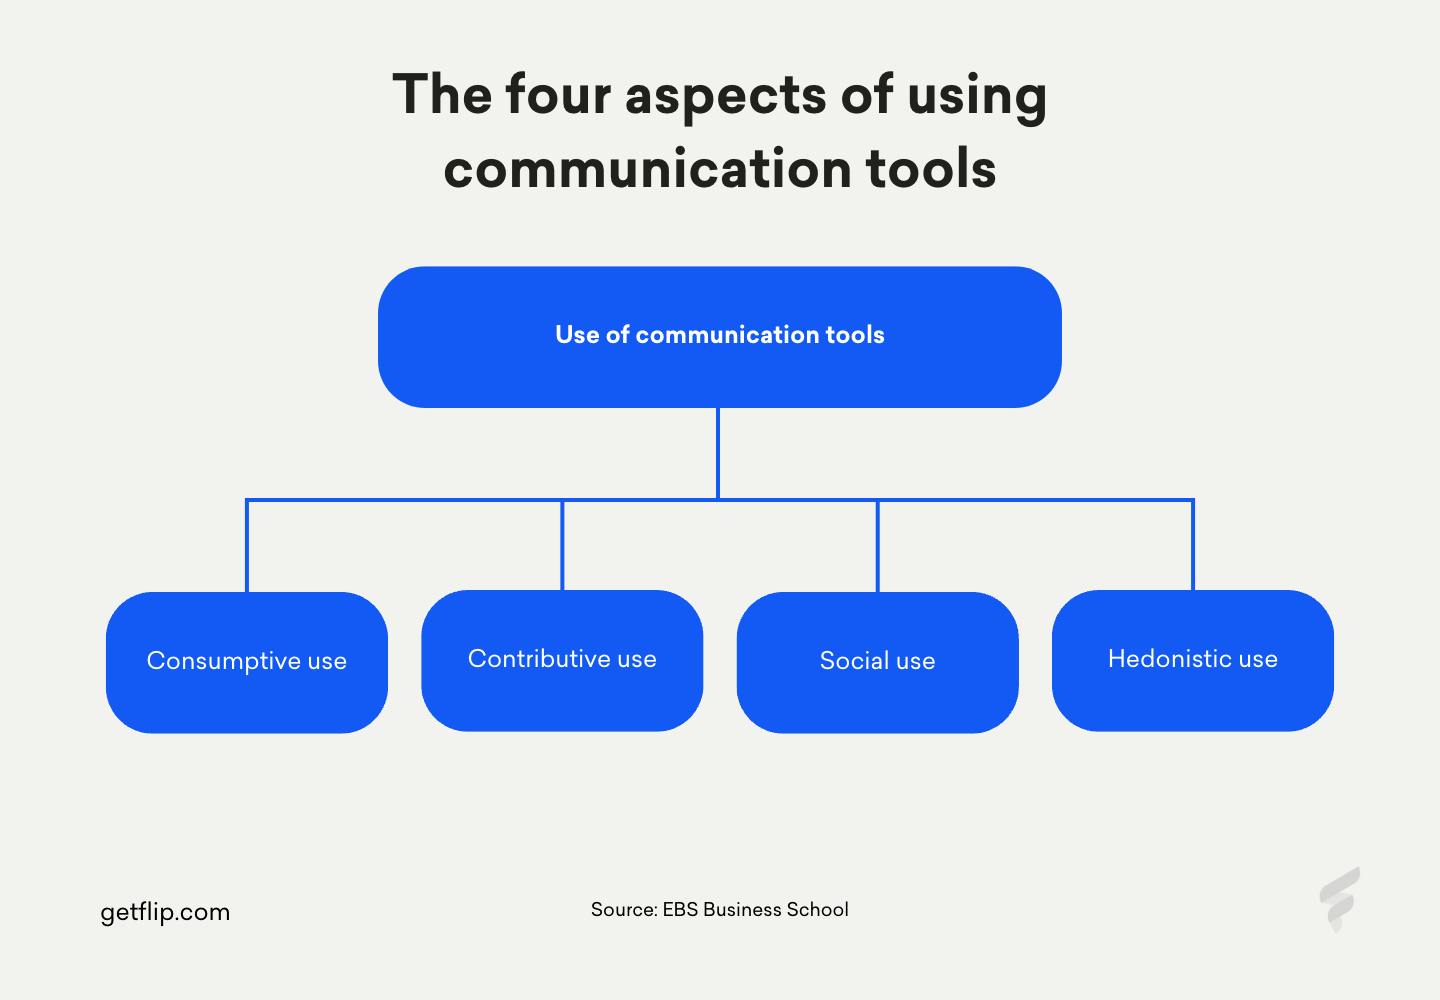 Communication tools can be used in four different ways.